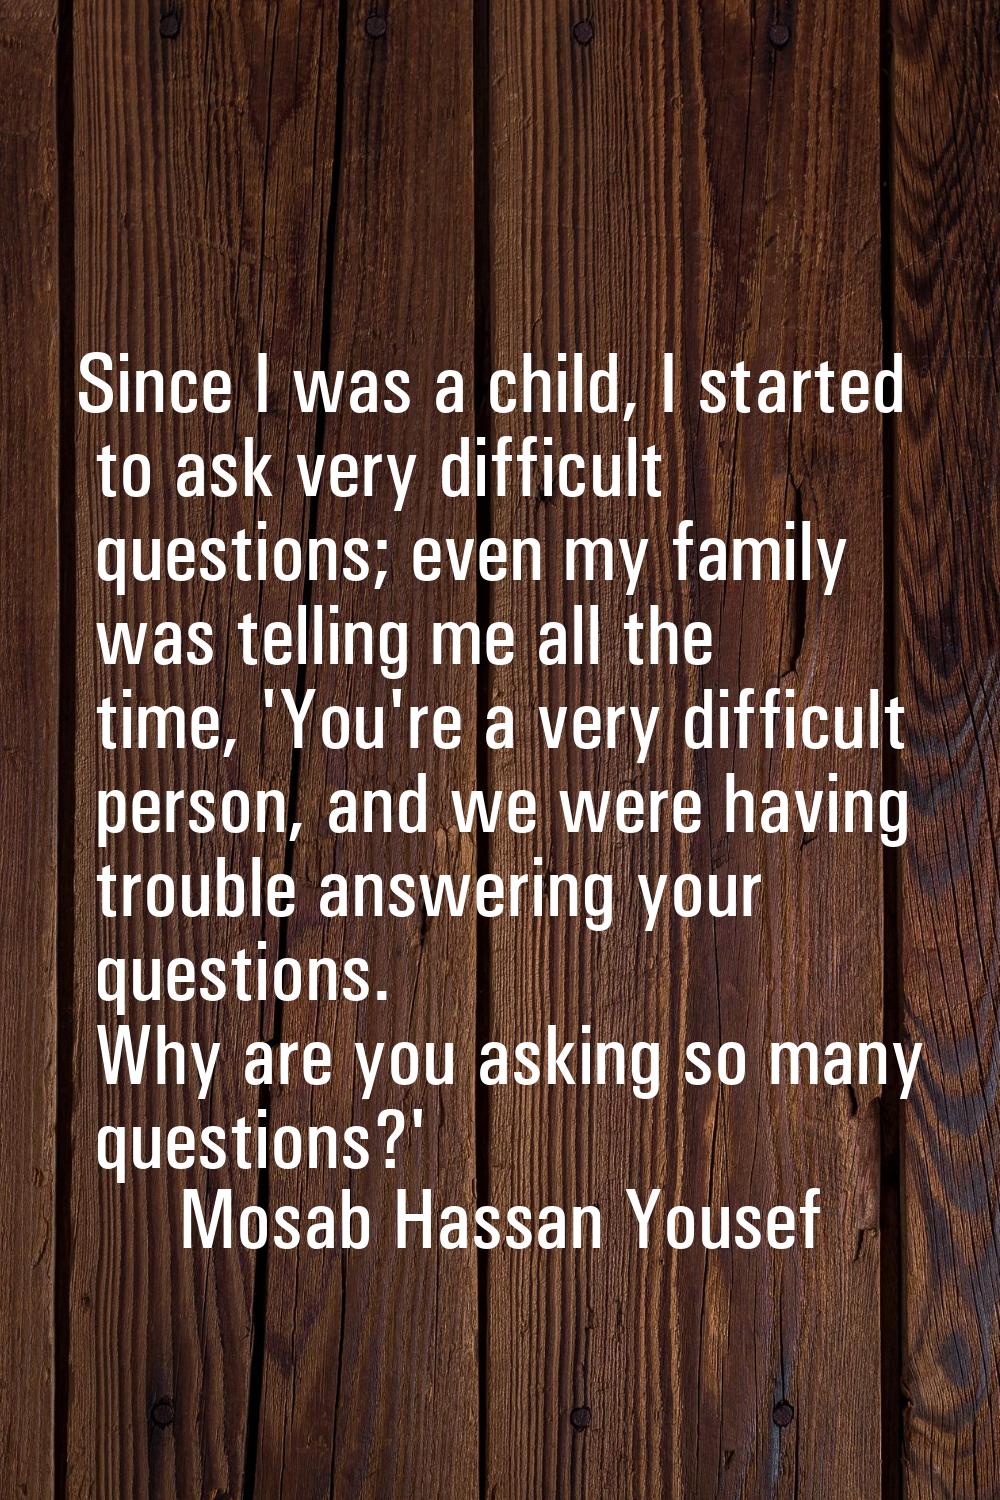 Since I was a child, I started to ask very difficult questions; even my family was telling me all t